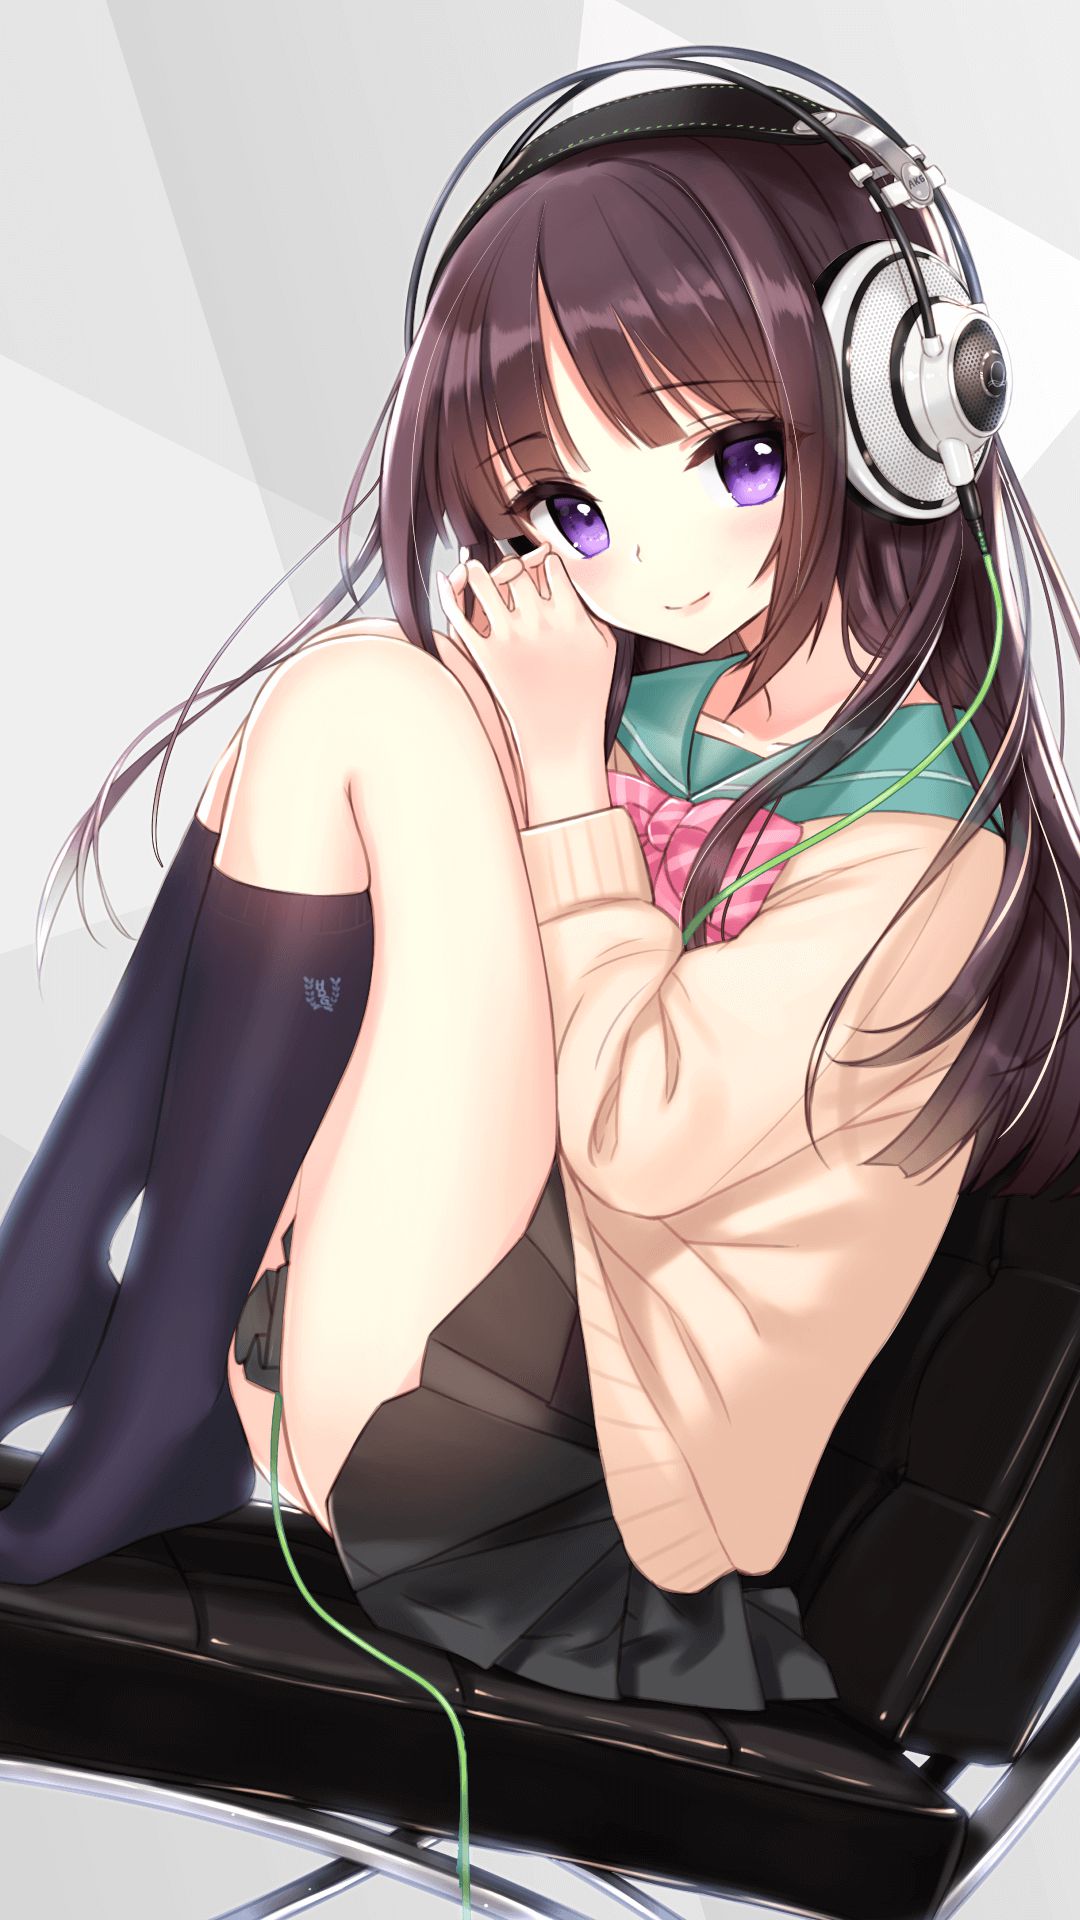 [Secondary] headphones x girl cute picture! 10